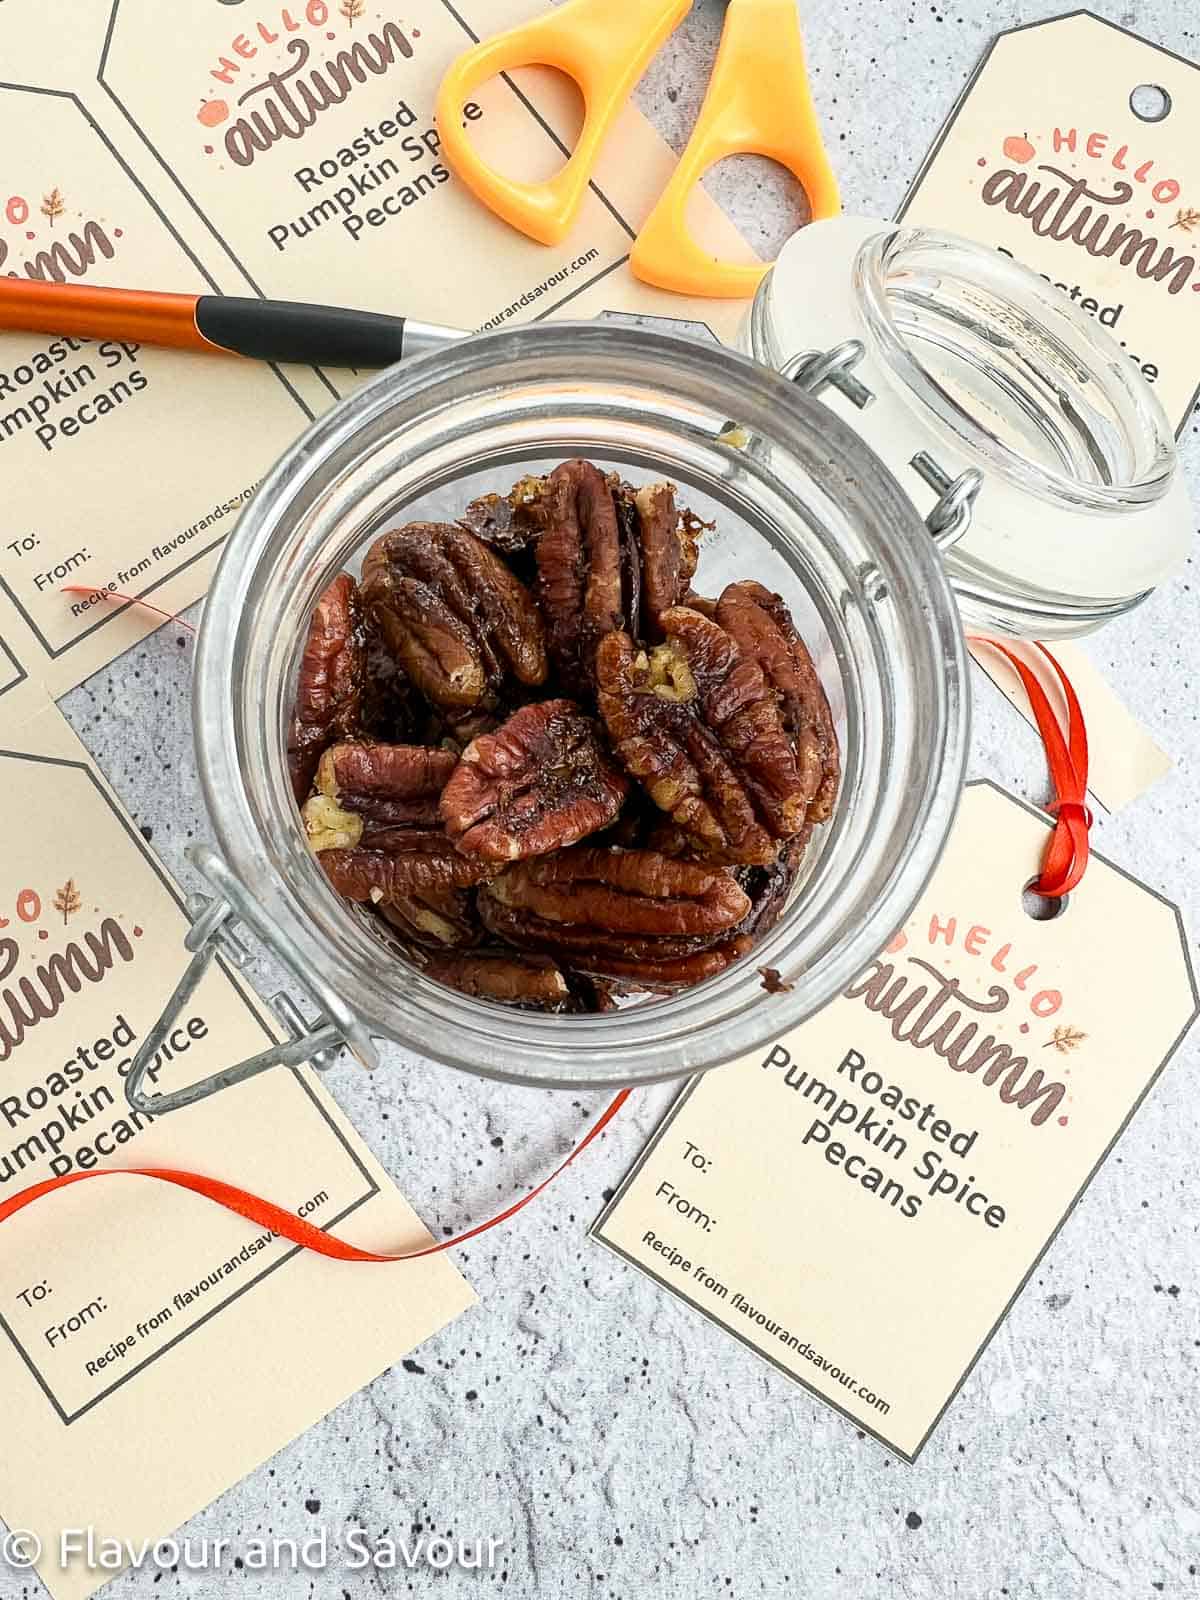 Roasted pumpkin spice pecans in a jar with gift tags beside it.